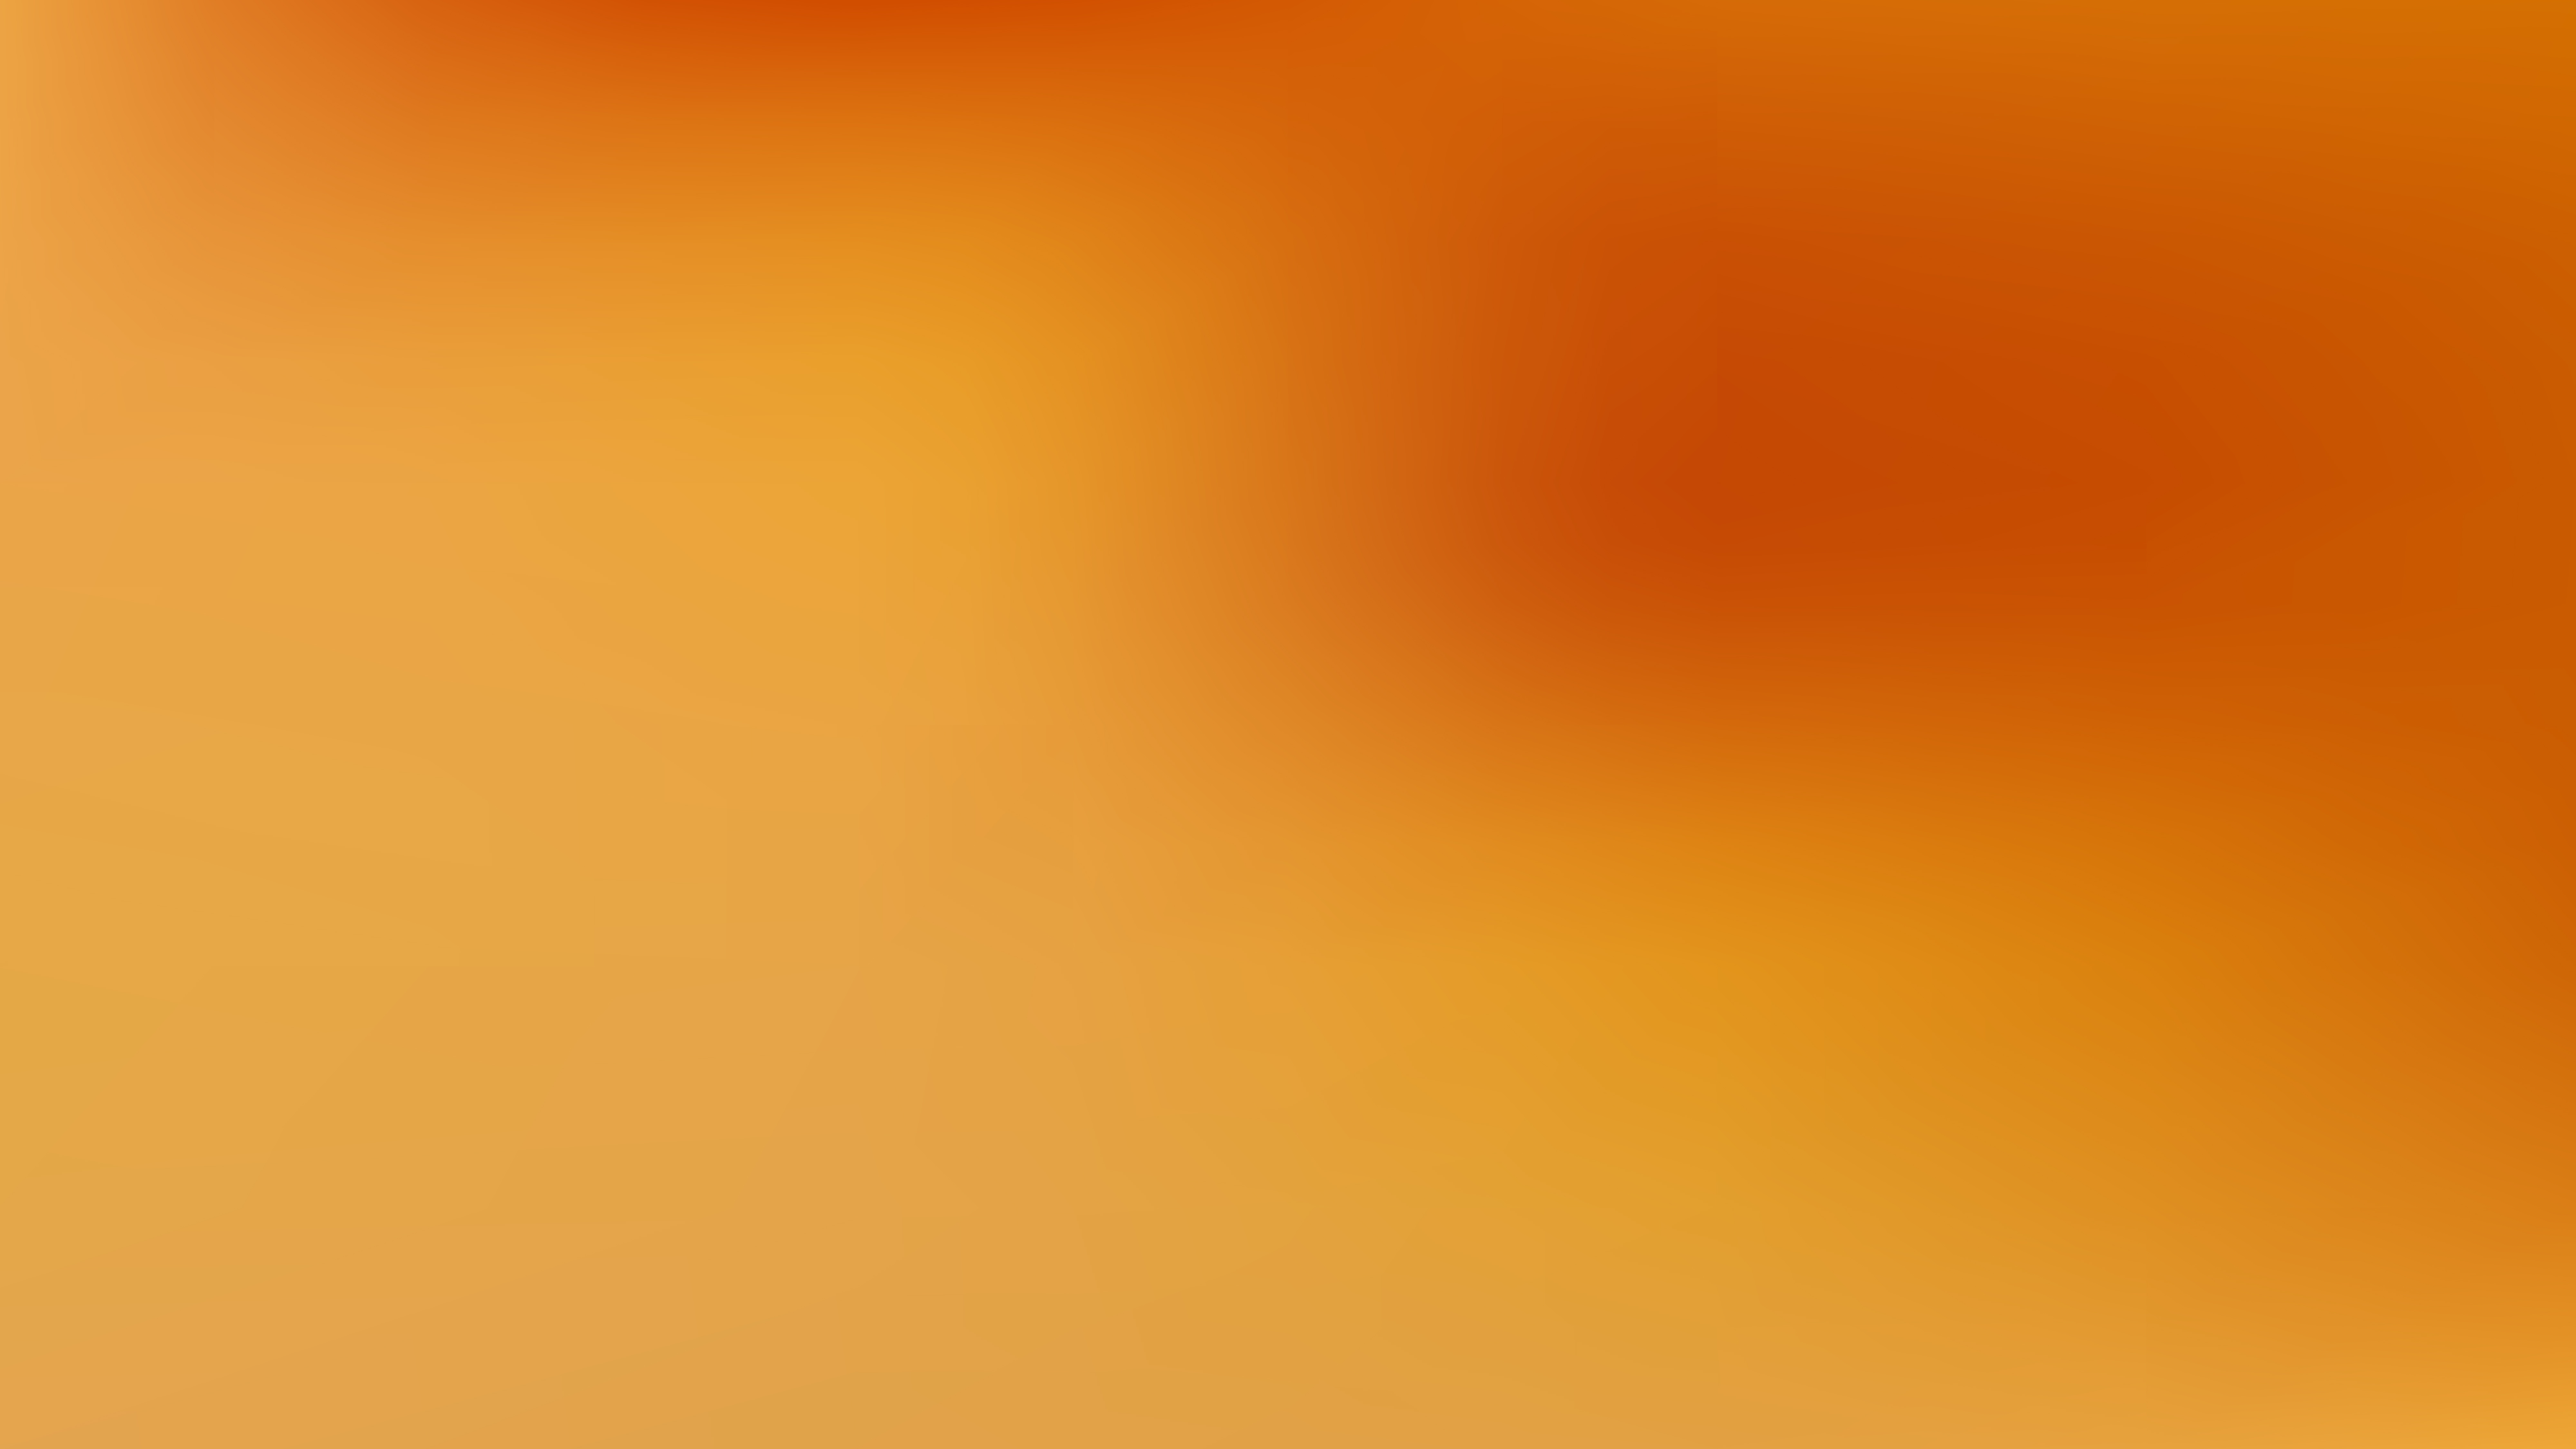 Red And Orange Professional Background Image